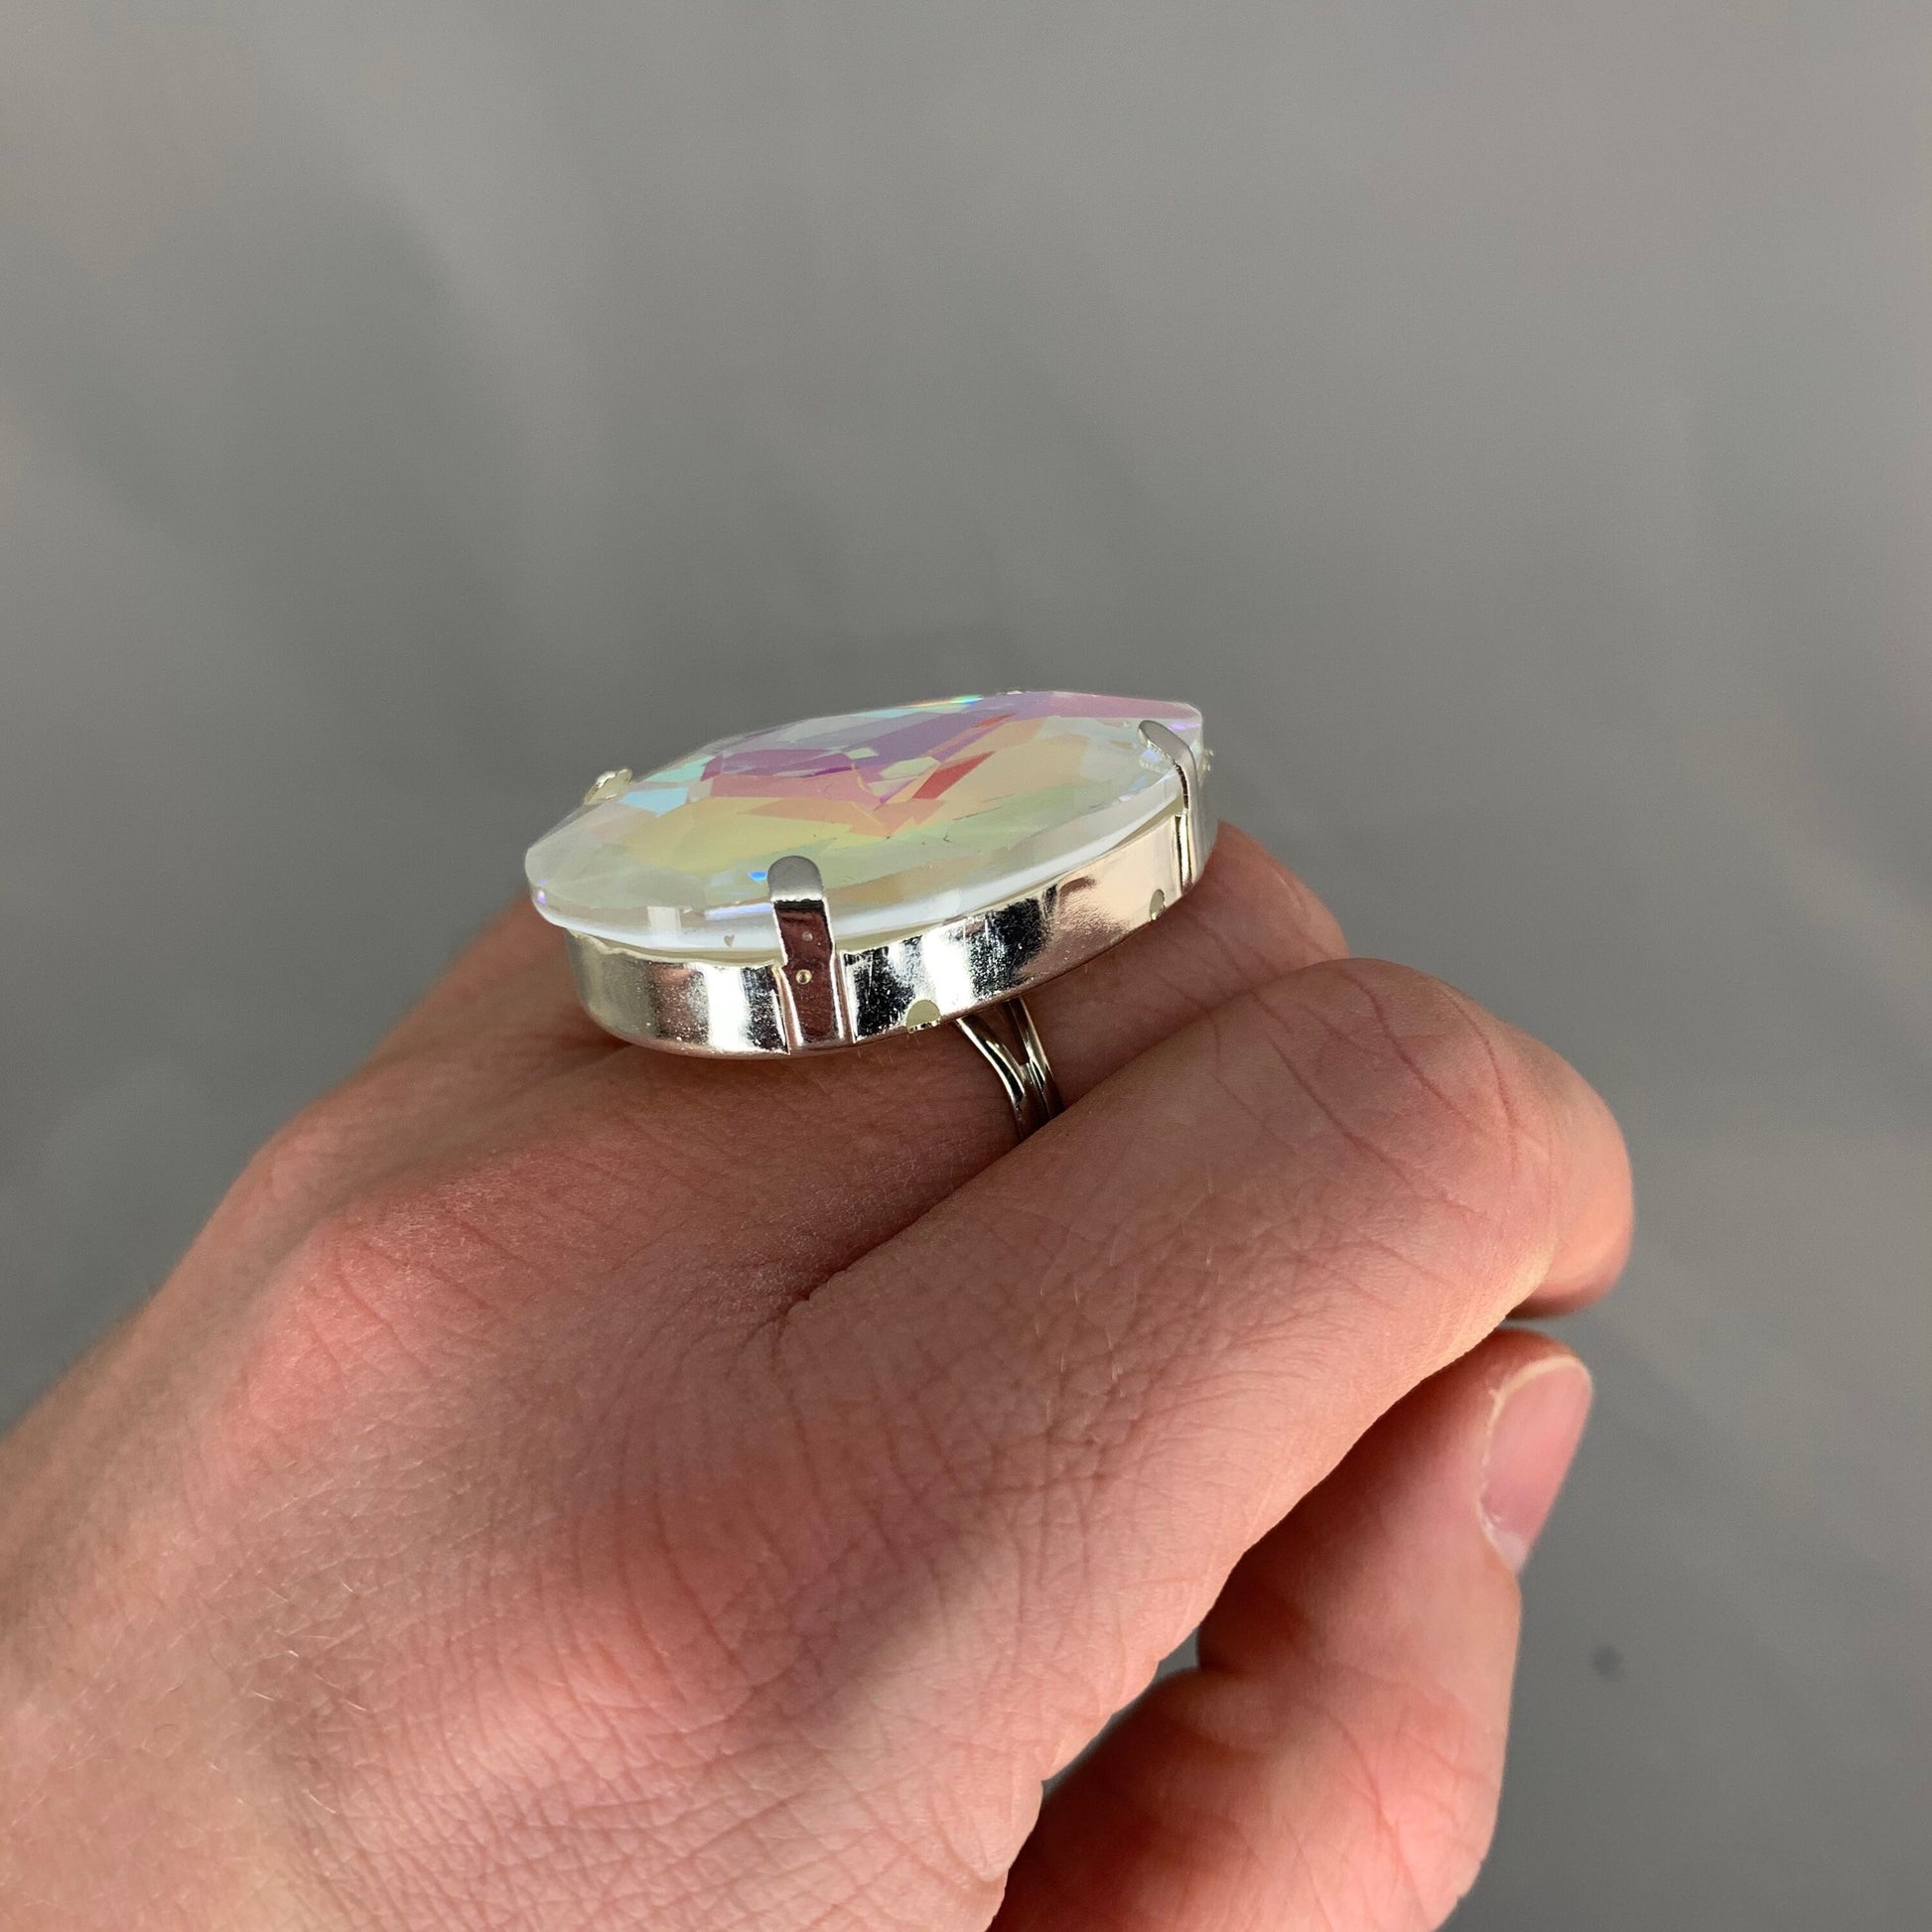 XL Pearlescent Multicolour Crystal Teardrop Ring / Cocktail Dress Ring / Adjustable back / Gift